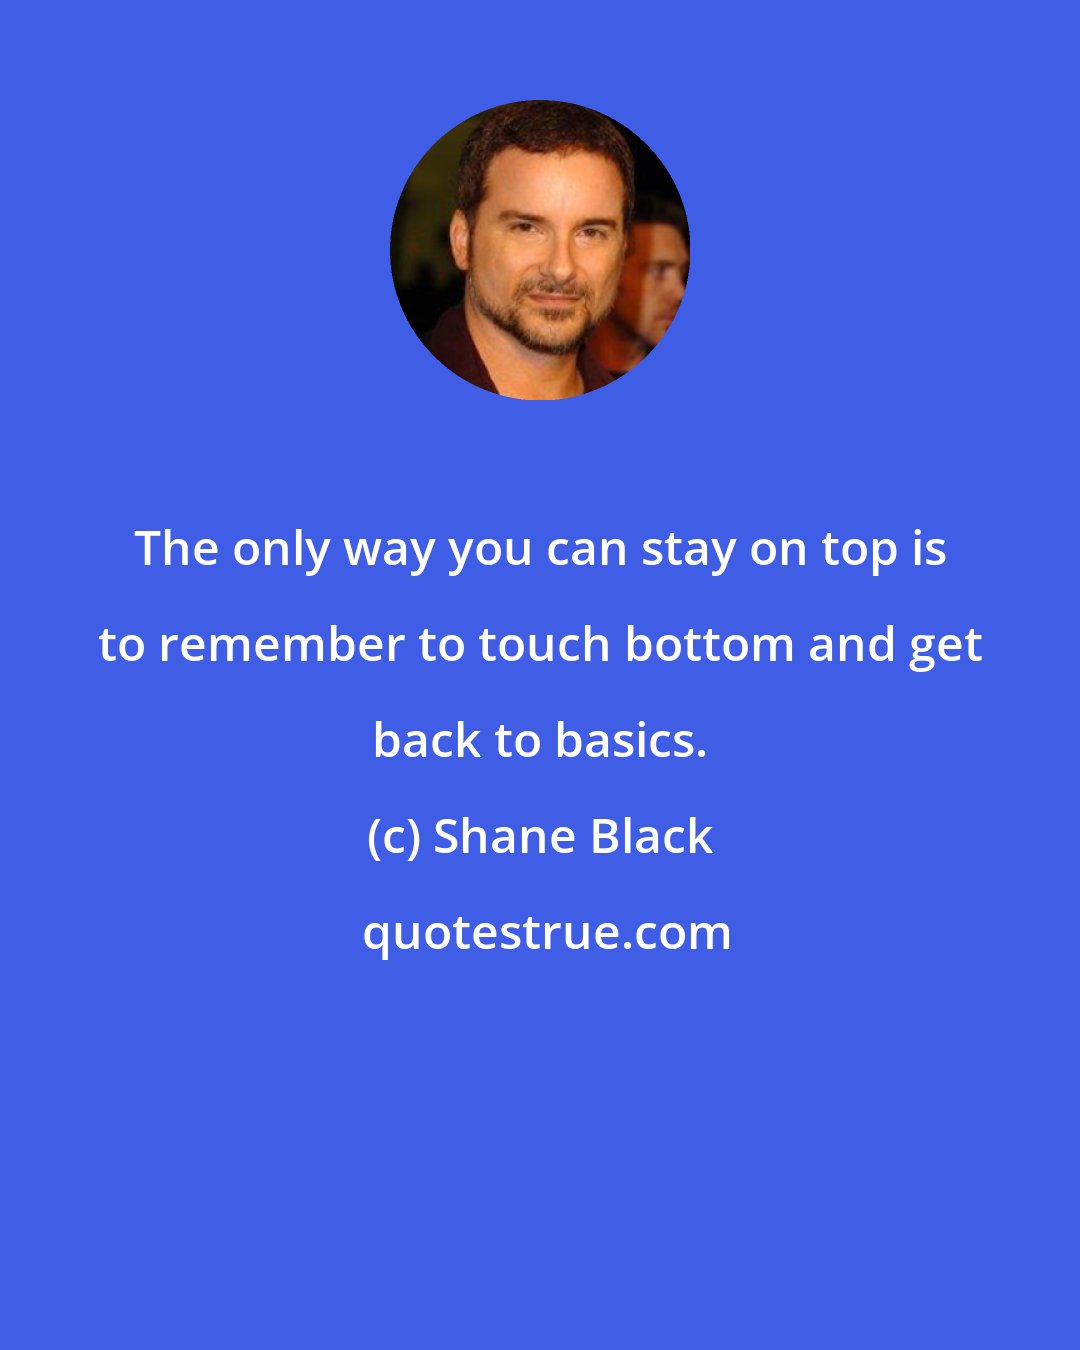 Shane Black: The only way you can stay on top is to remember to touch bottom and get back to basics.